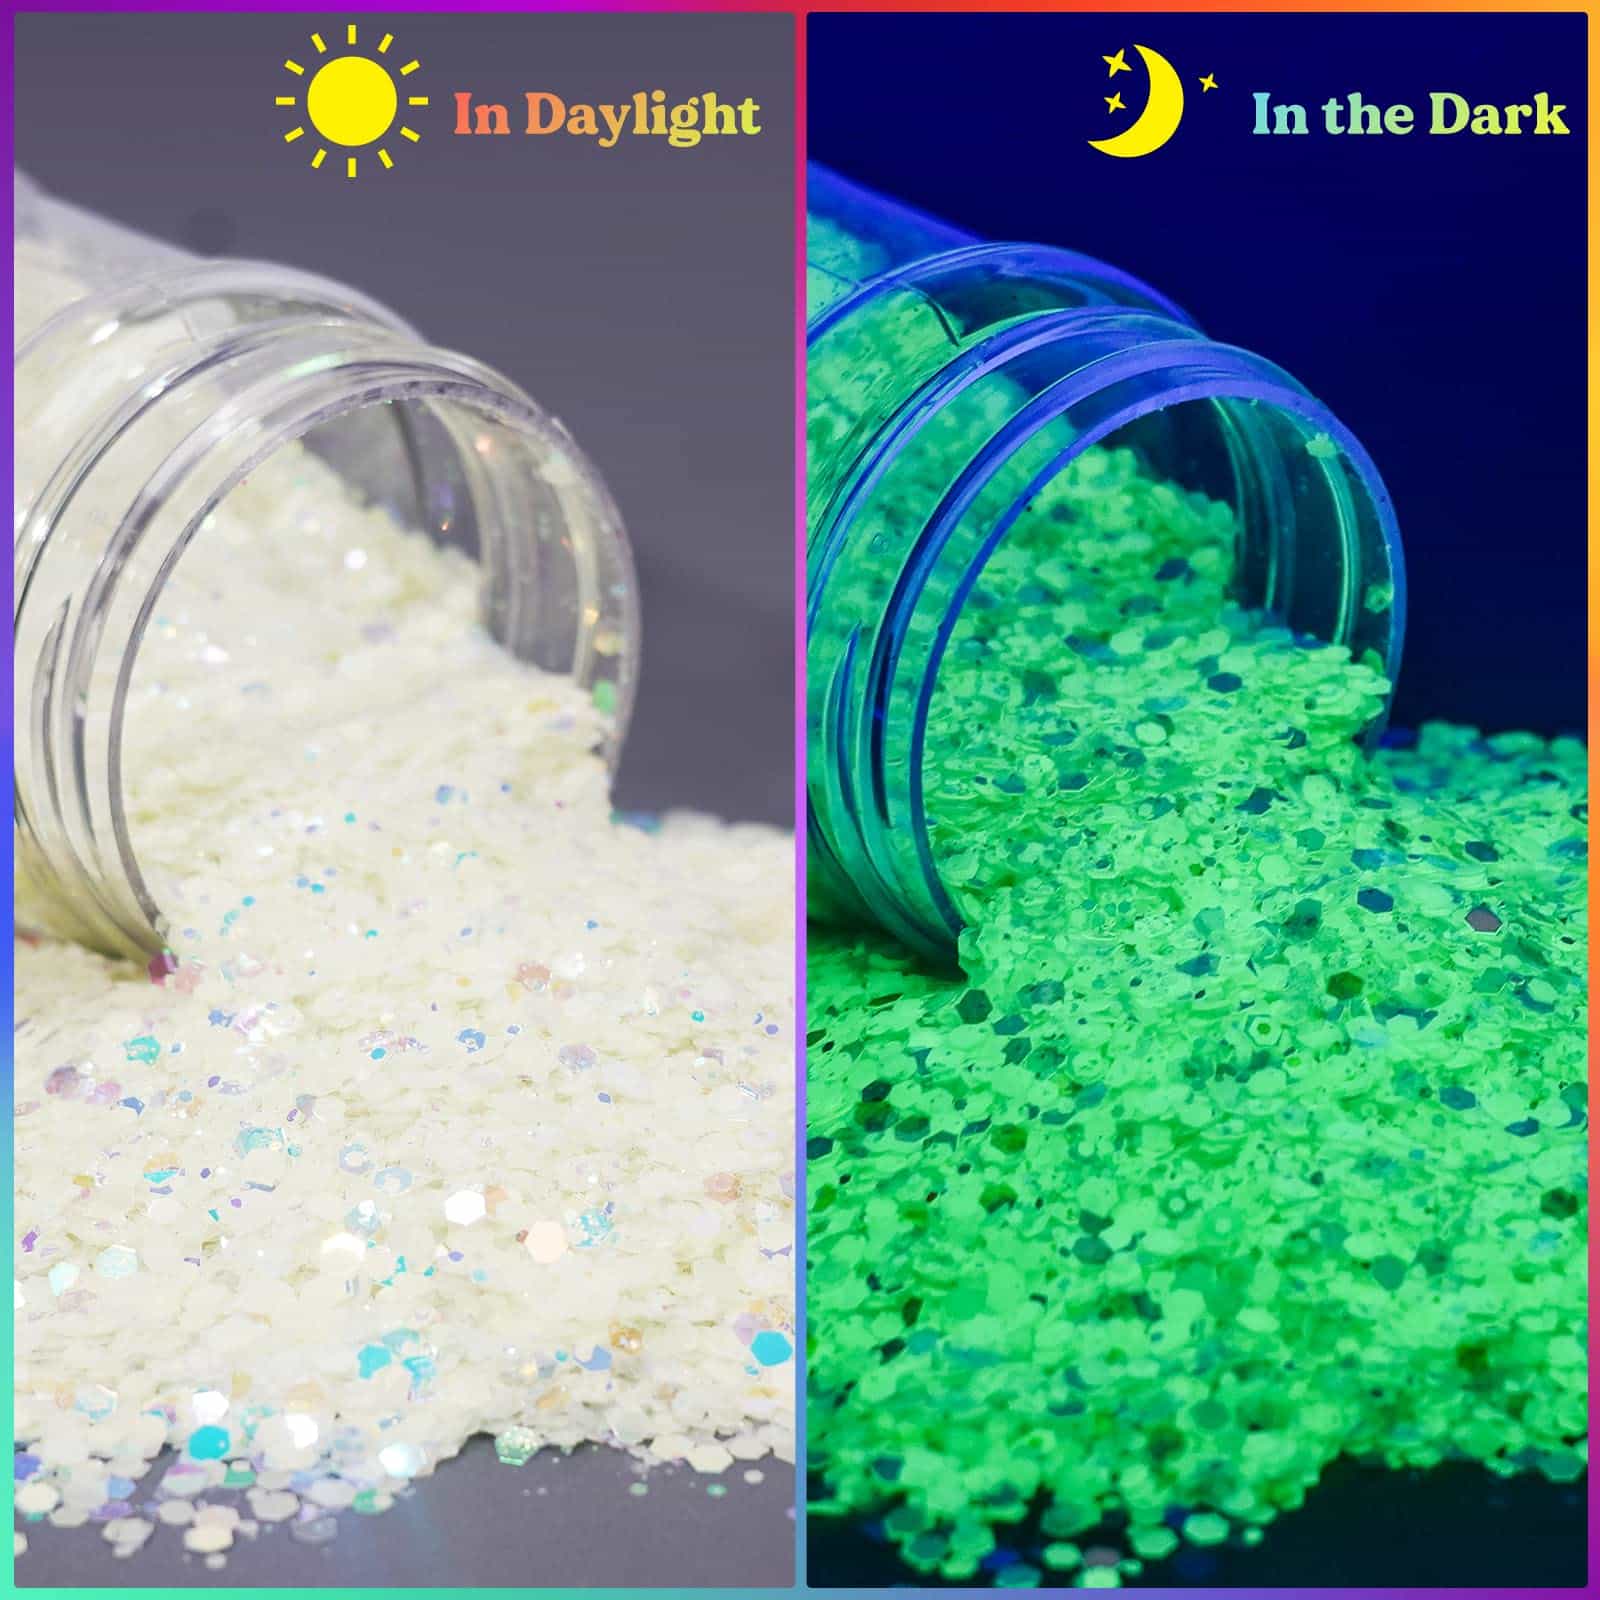 LET'S RESIN Glow in The Dark Glitter, 100G High Luminous Glitter for Resin/Makeup,  Chunky Glitter for Epoxy/UV Resin, Nail, Cosmetic, Skin, DIY Crafts, Slime,  Tumblers, Halloween Decor green